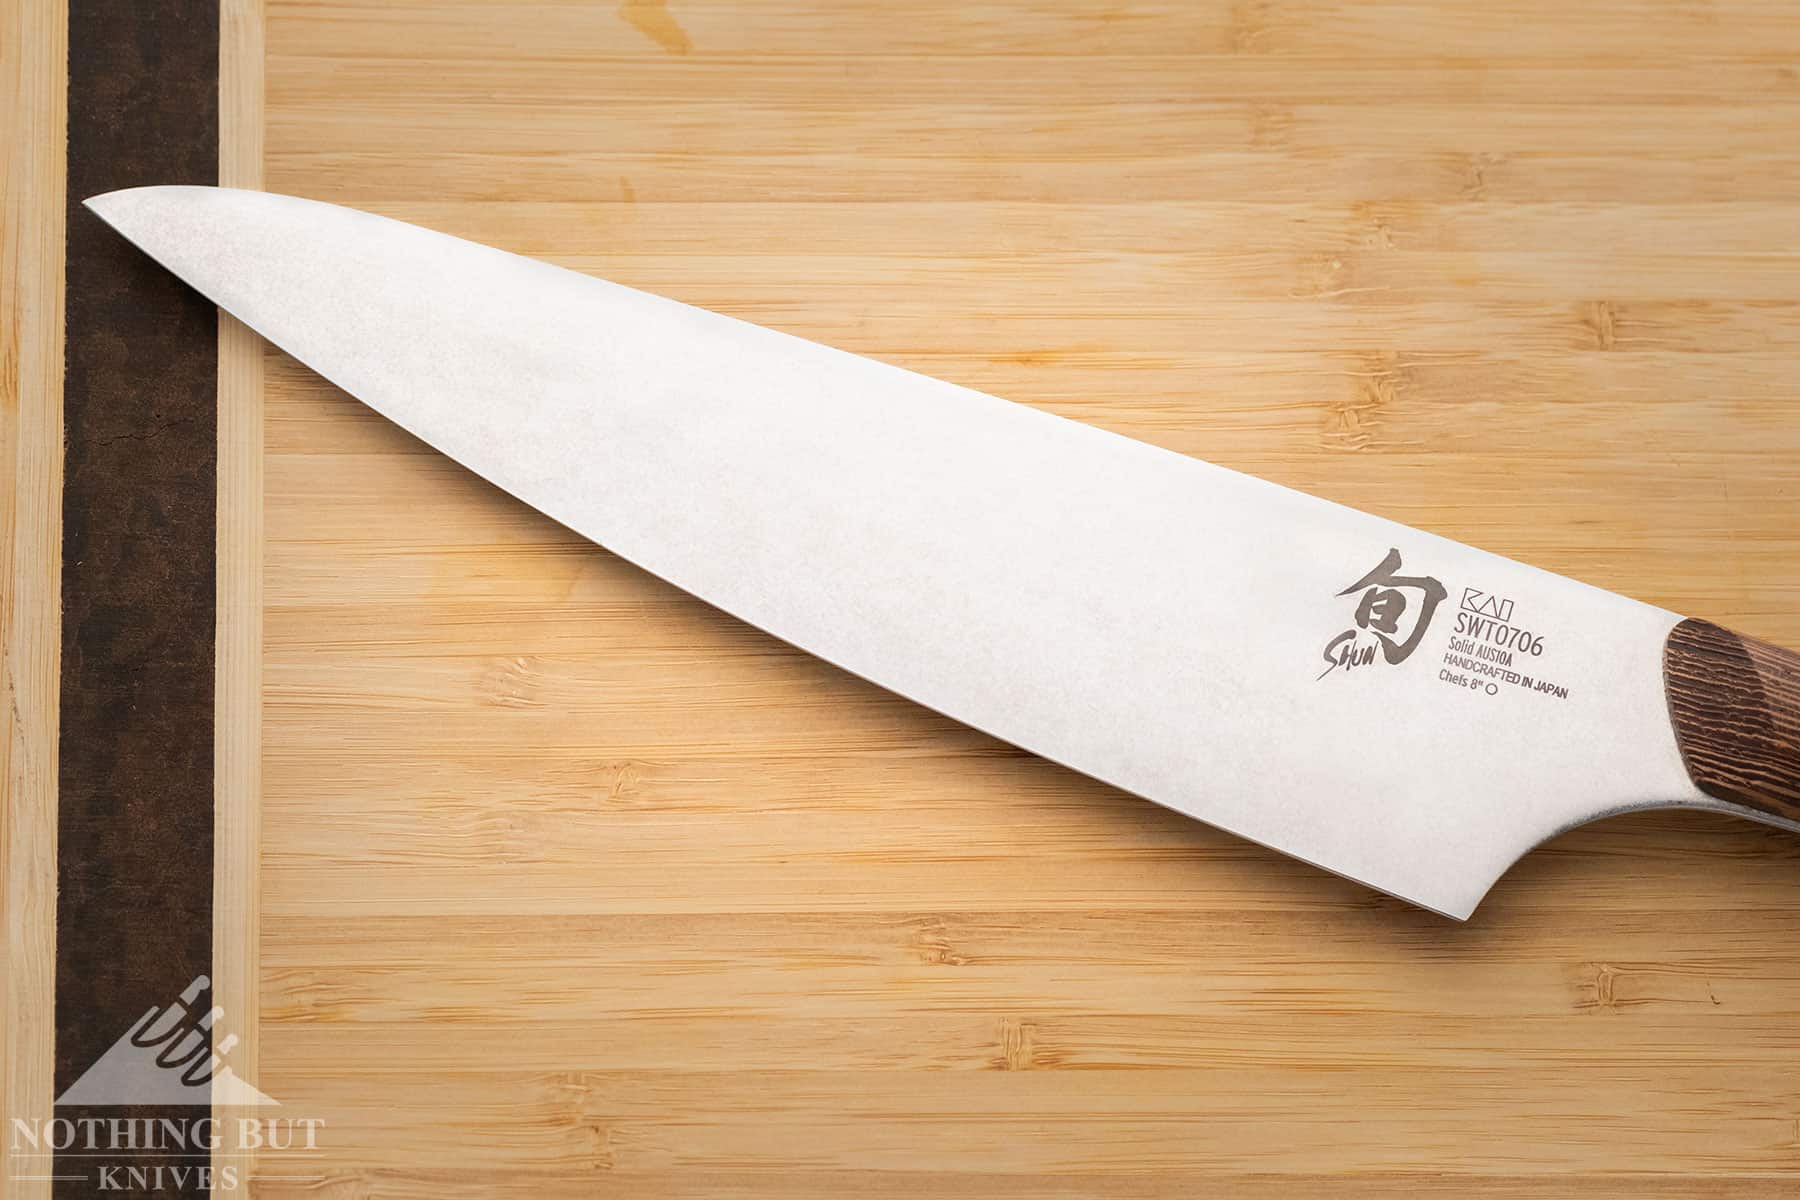 There’s more belly to the blade of the Shun Kanso chef's knife than it might look like. 